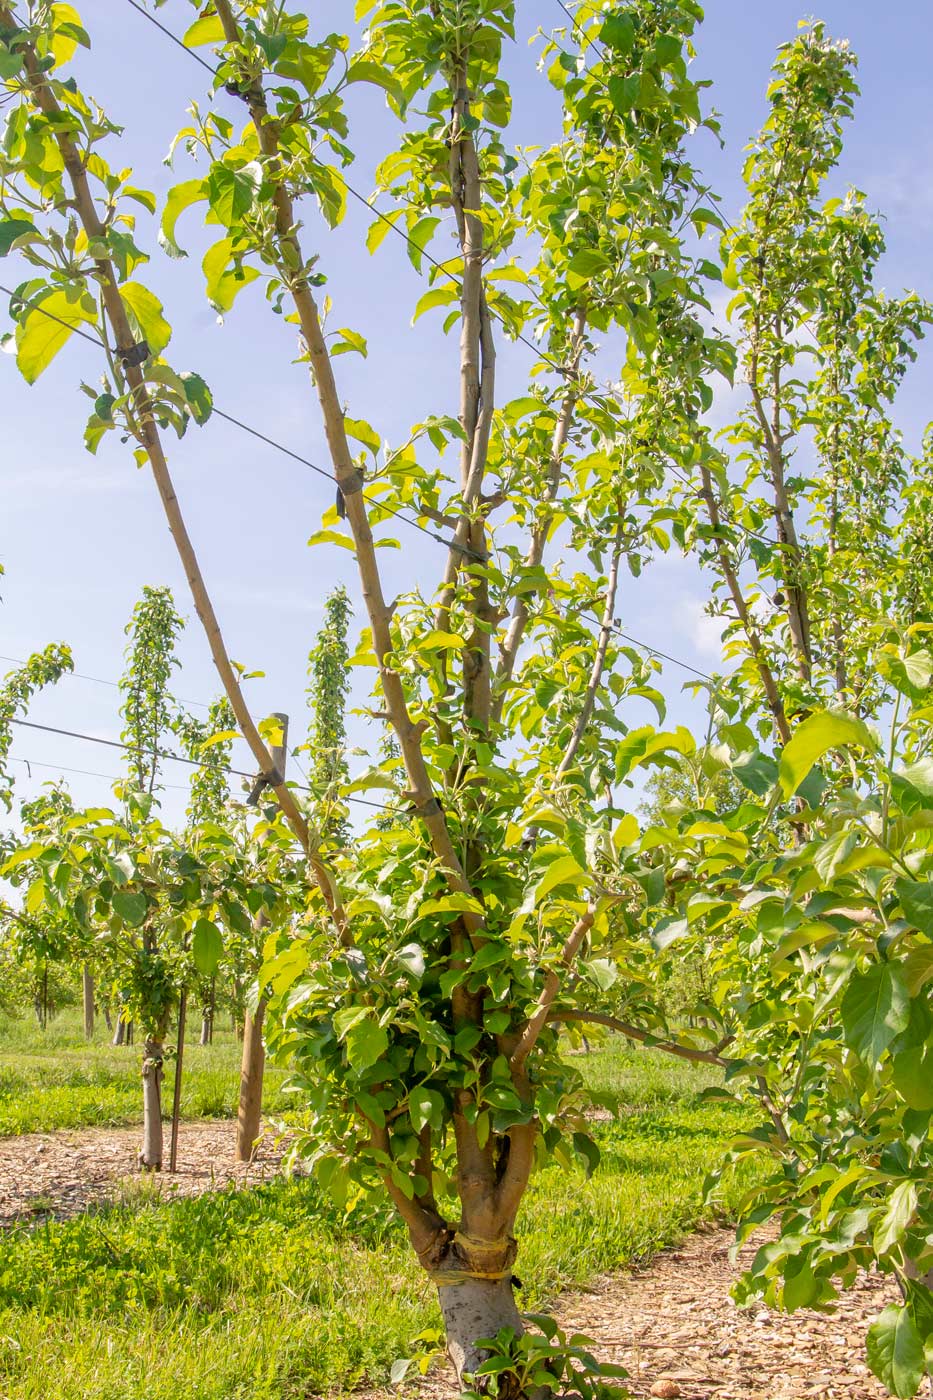 Experiments with multi-leader Honeycrisp, which was top-worked over an sold Red Delicious block, helped Ridgetop Orchards improve the orchard portfolio when investment for new plantings was limited, said grower Mark Boyer of Fishertown, Pennsylvania. (Kate Prengaman/Good Fruit Grower)